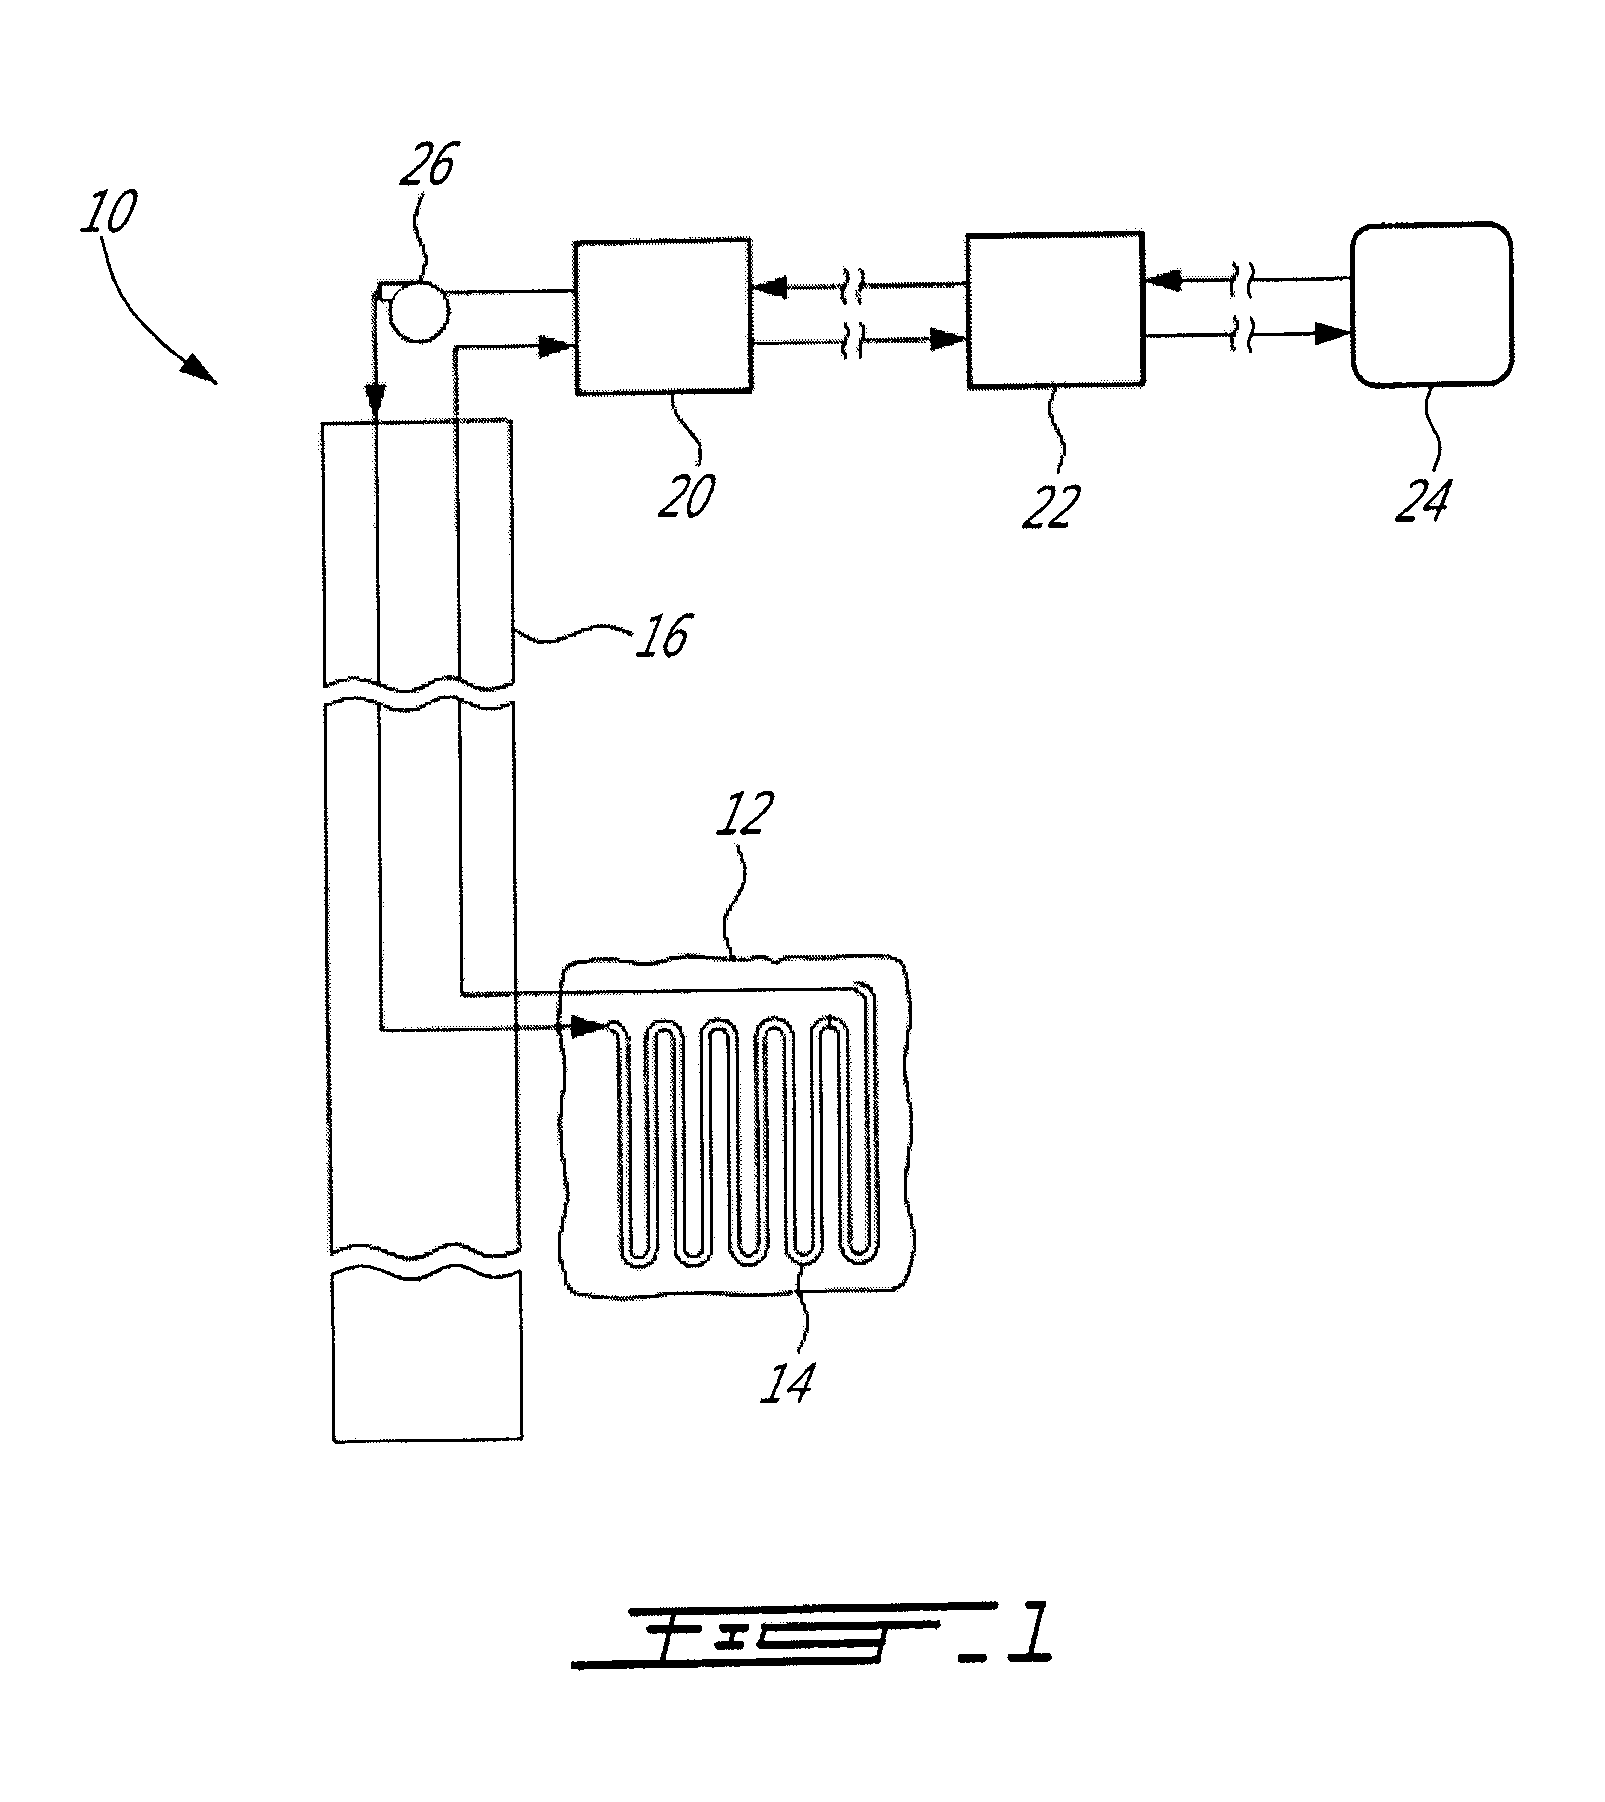 Method of extracting energy from a cavity created by mining operations